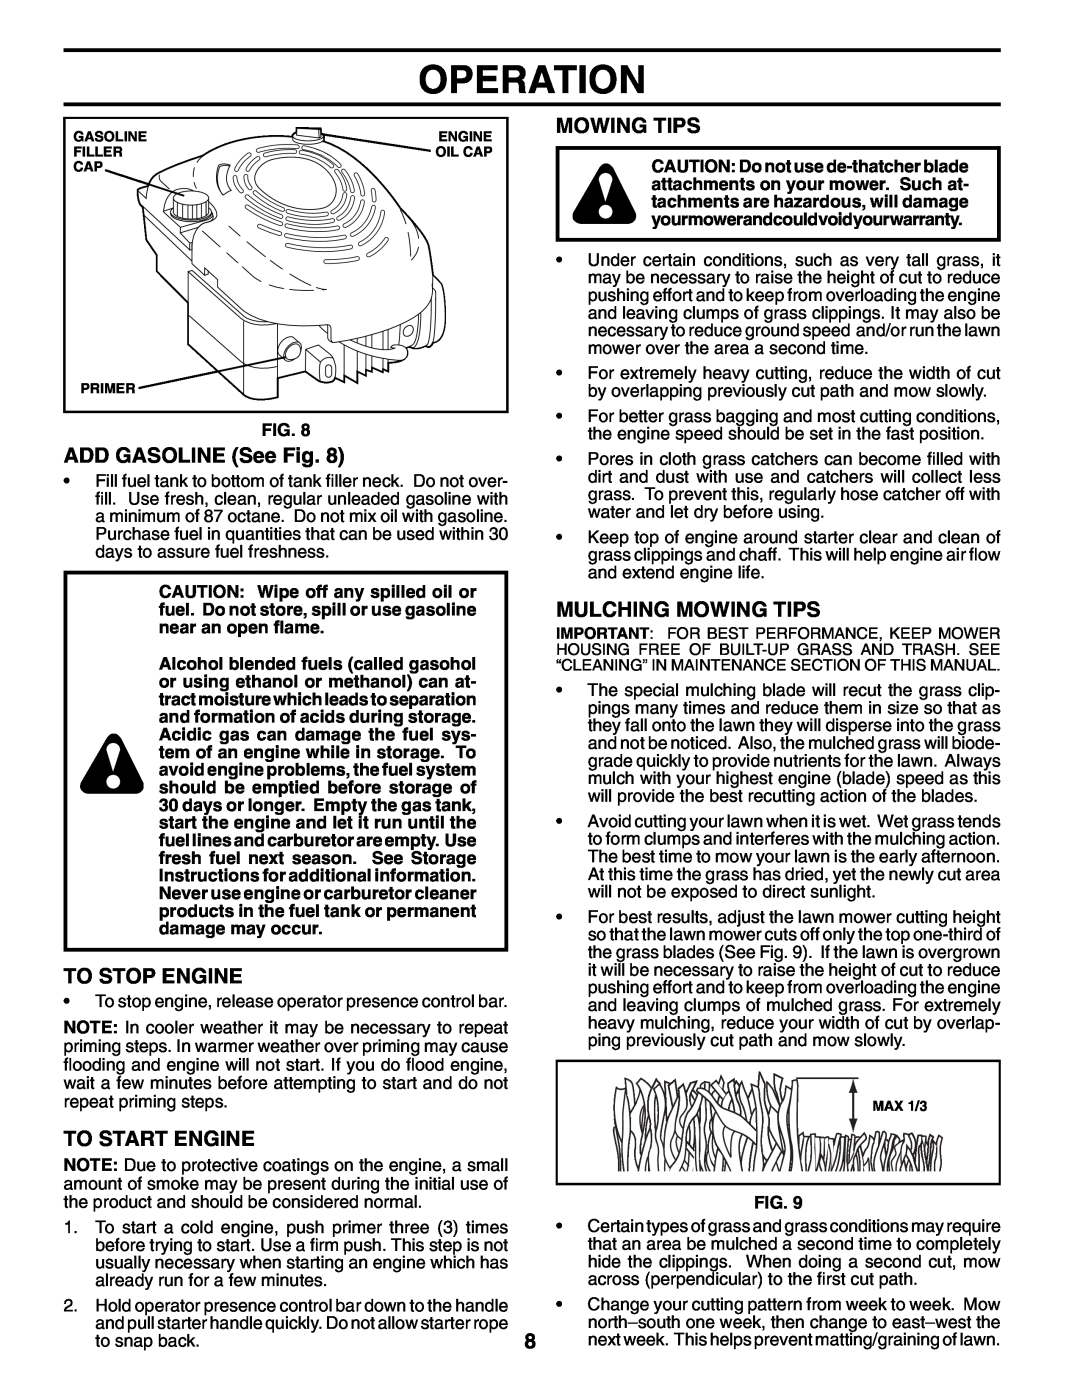 Husqvarna 6522SL owner manual ADD GASOLINE See Fig, To Stop Engine, To Start Engine, Mulching Mowing Tips, Operation 